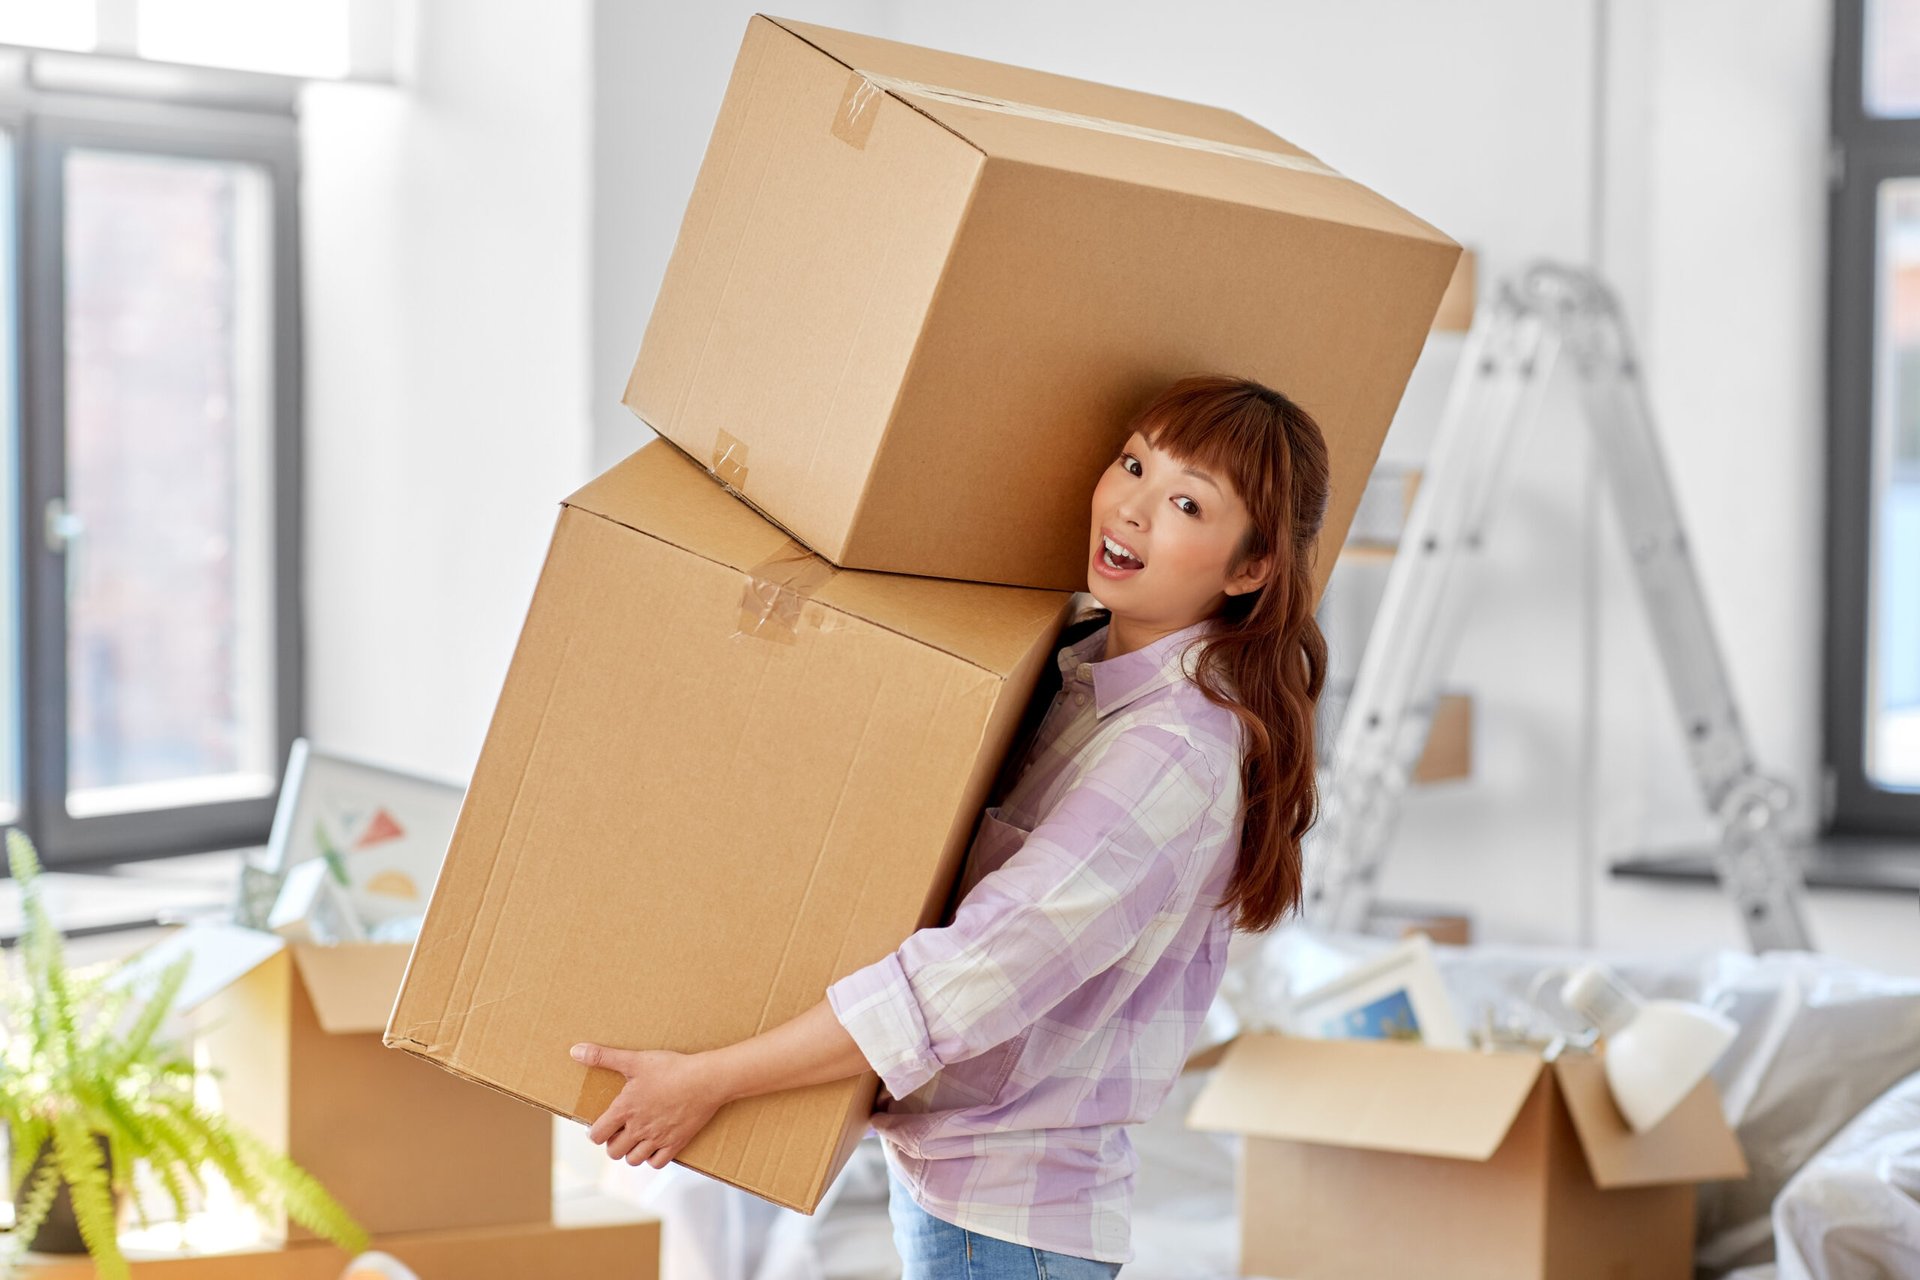 Excited woman carrying moving boxes to her new home